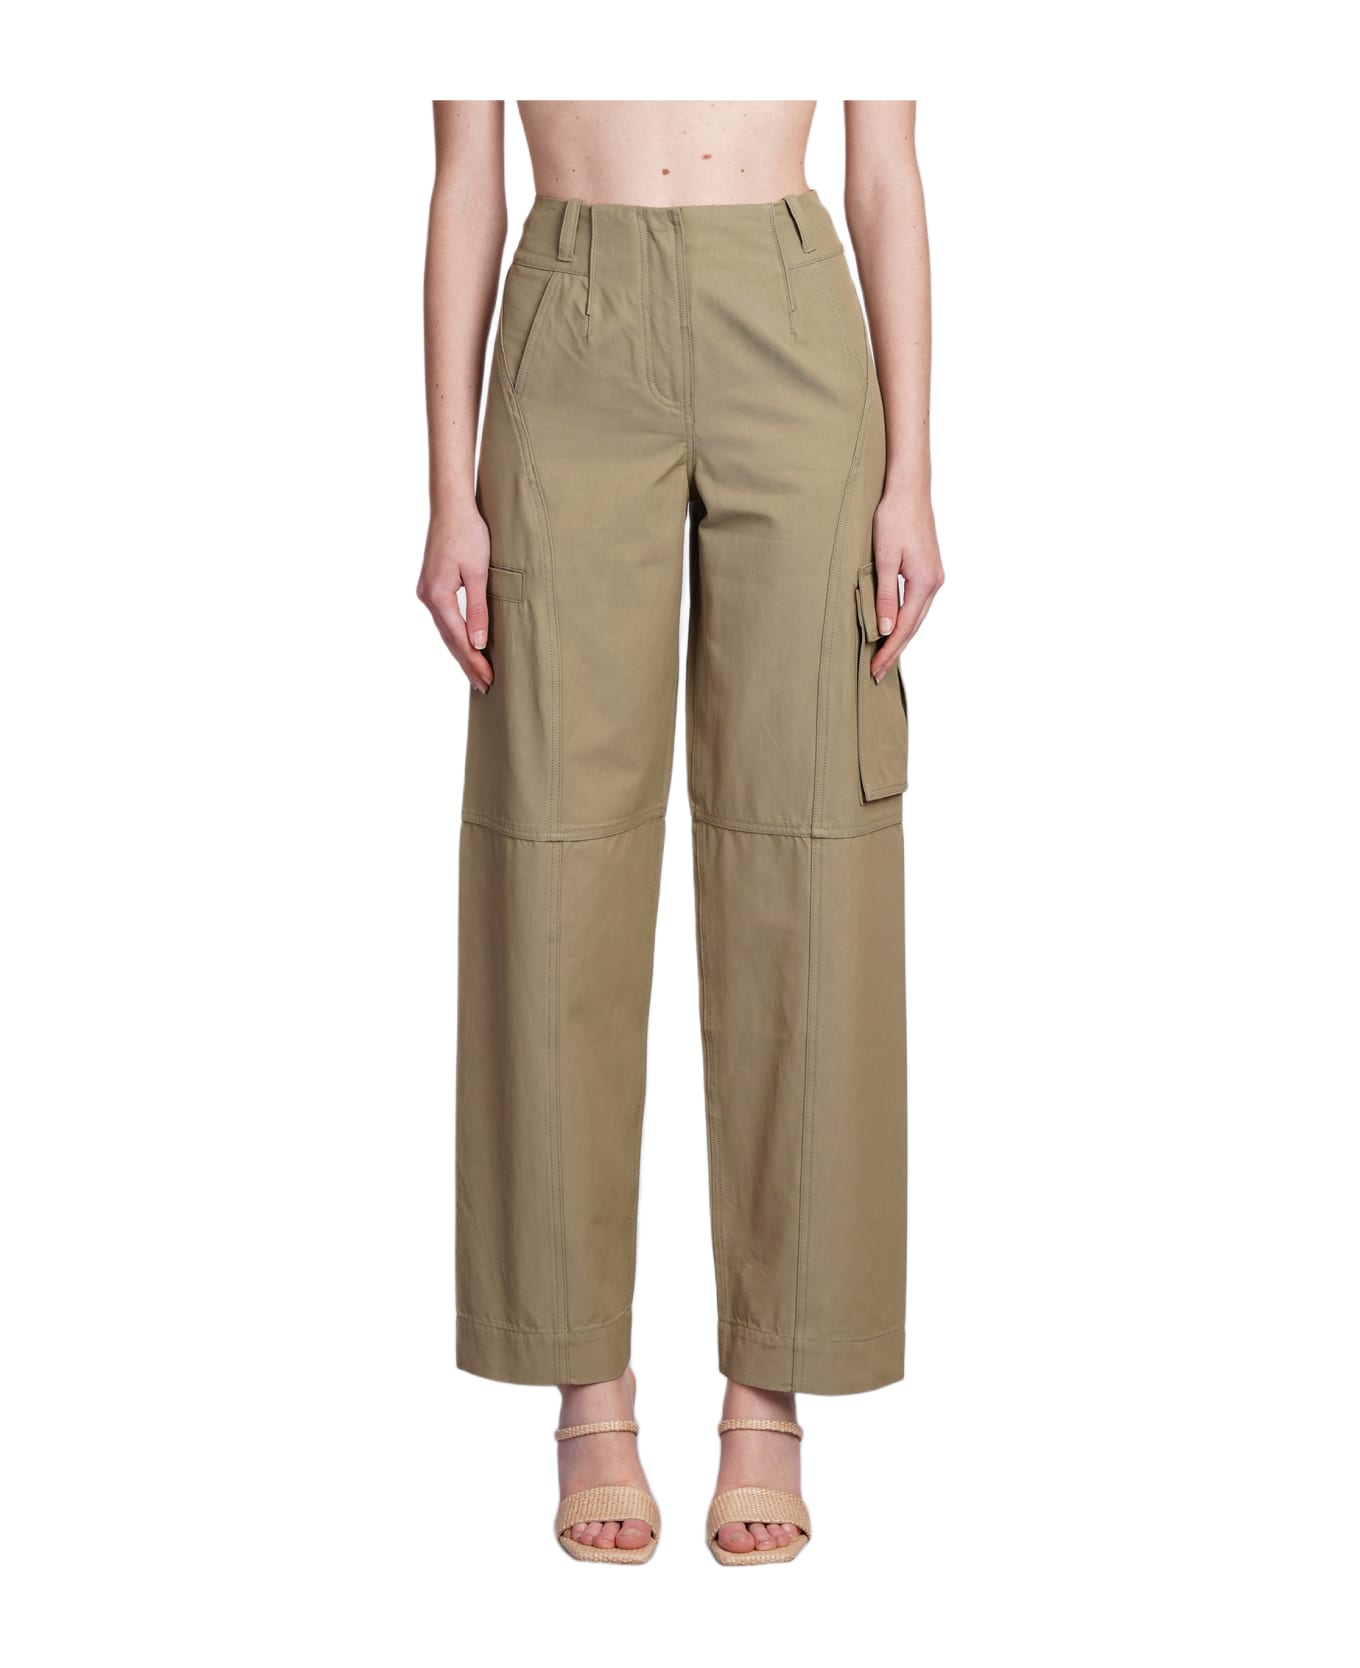 Cult Gaia Adrie Pants In Green Cotton - green